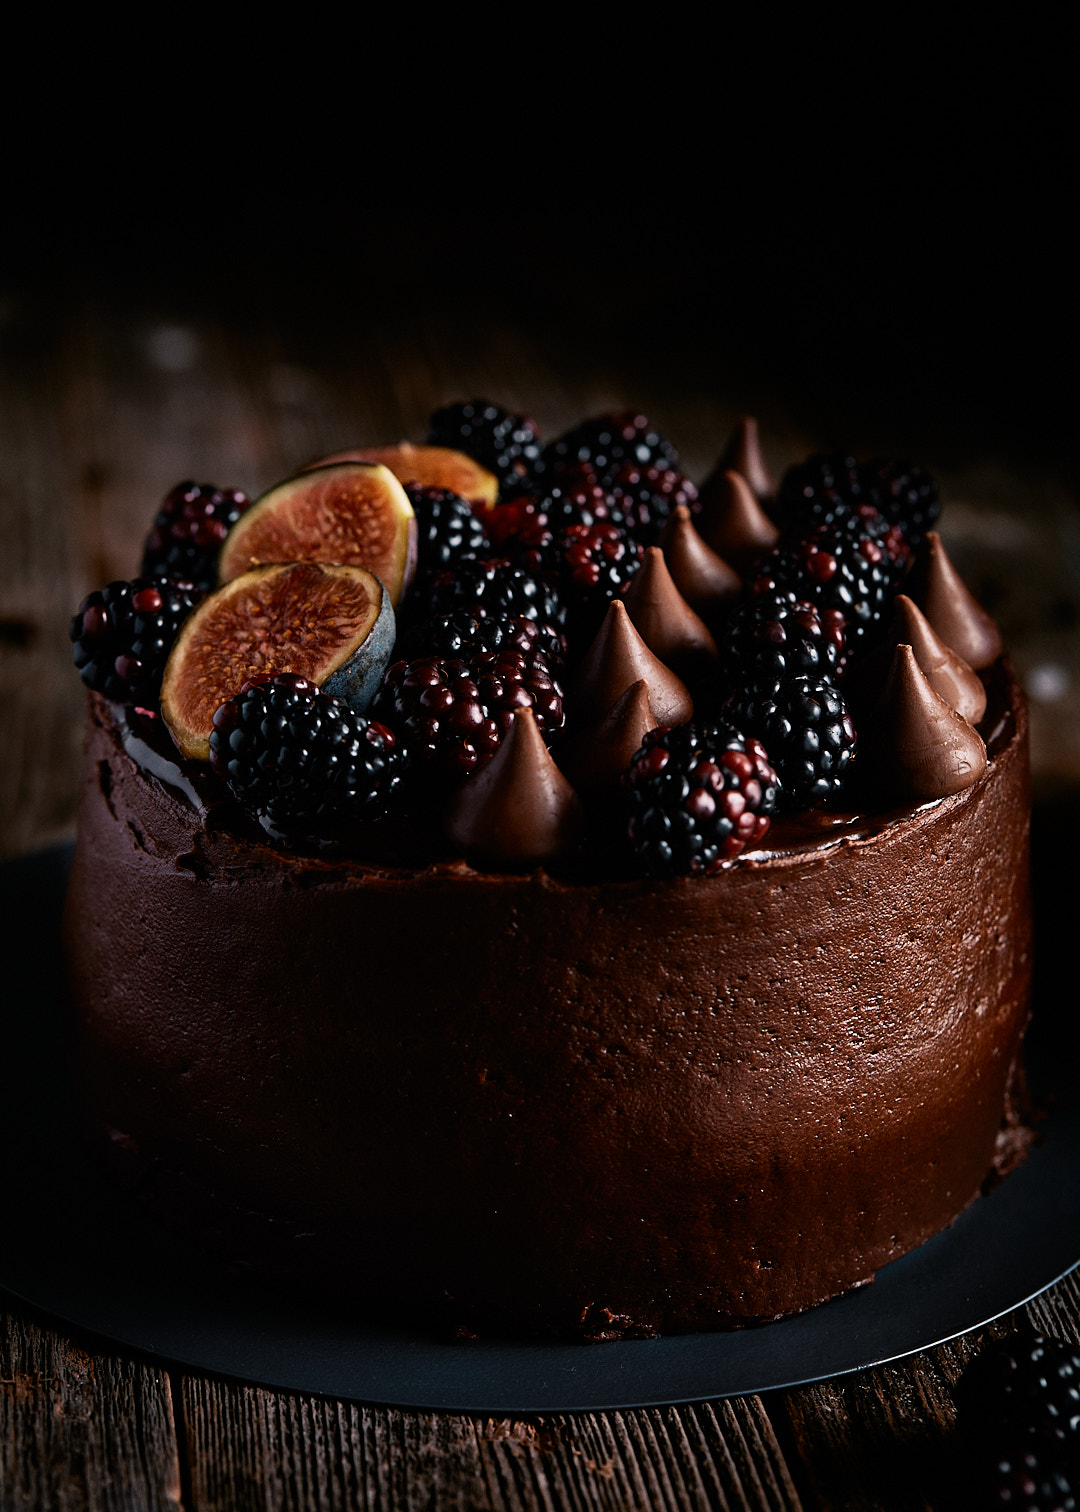 Chocolate cake with blackberries, hershey kisses, and figs on top